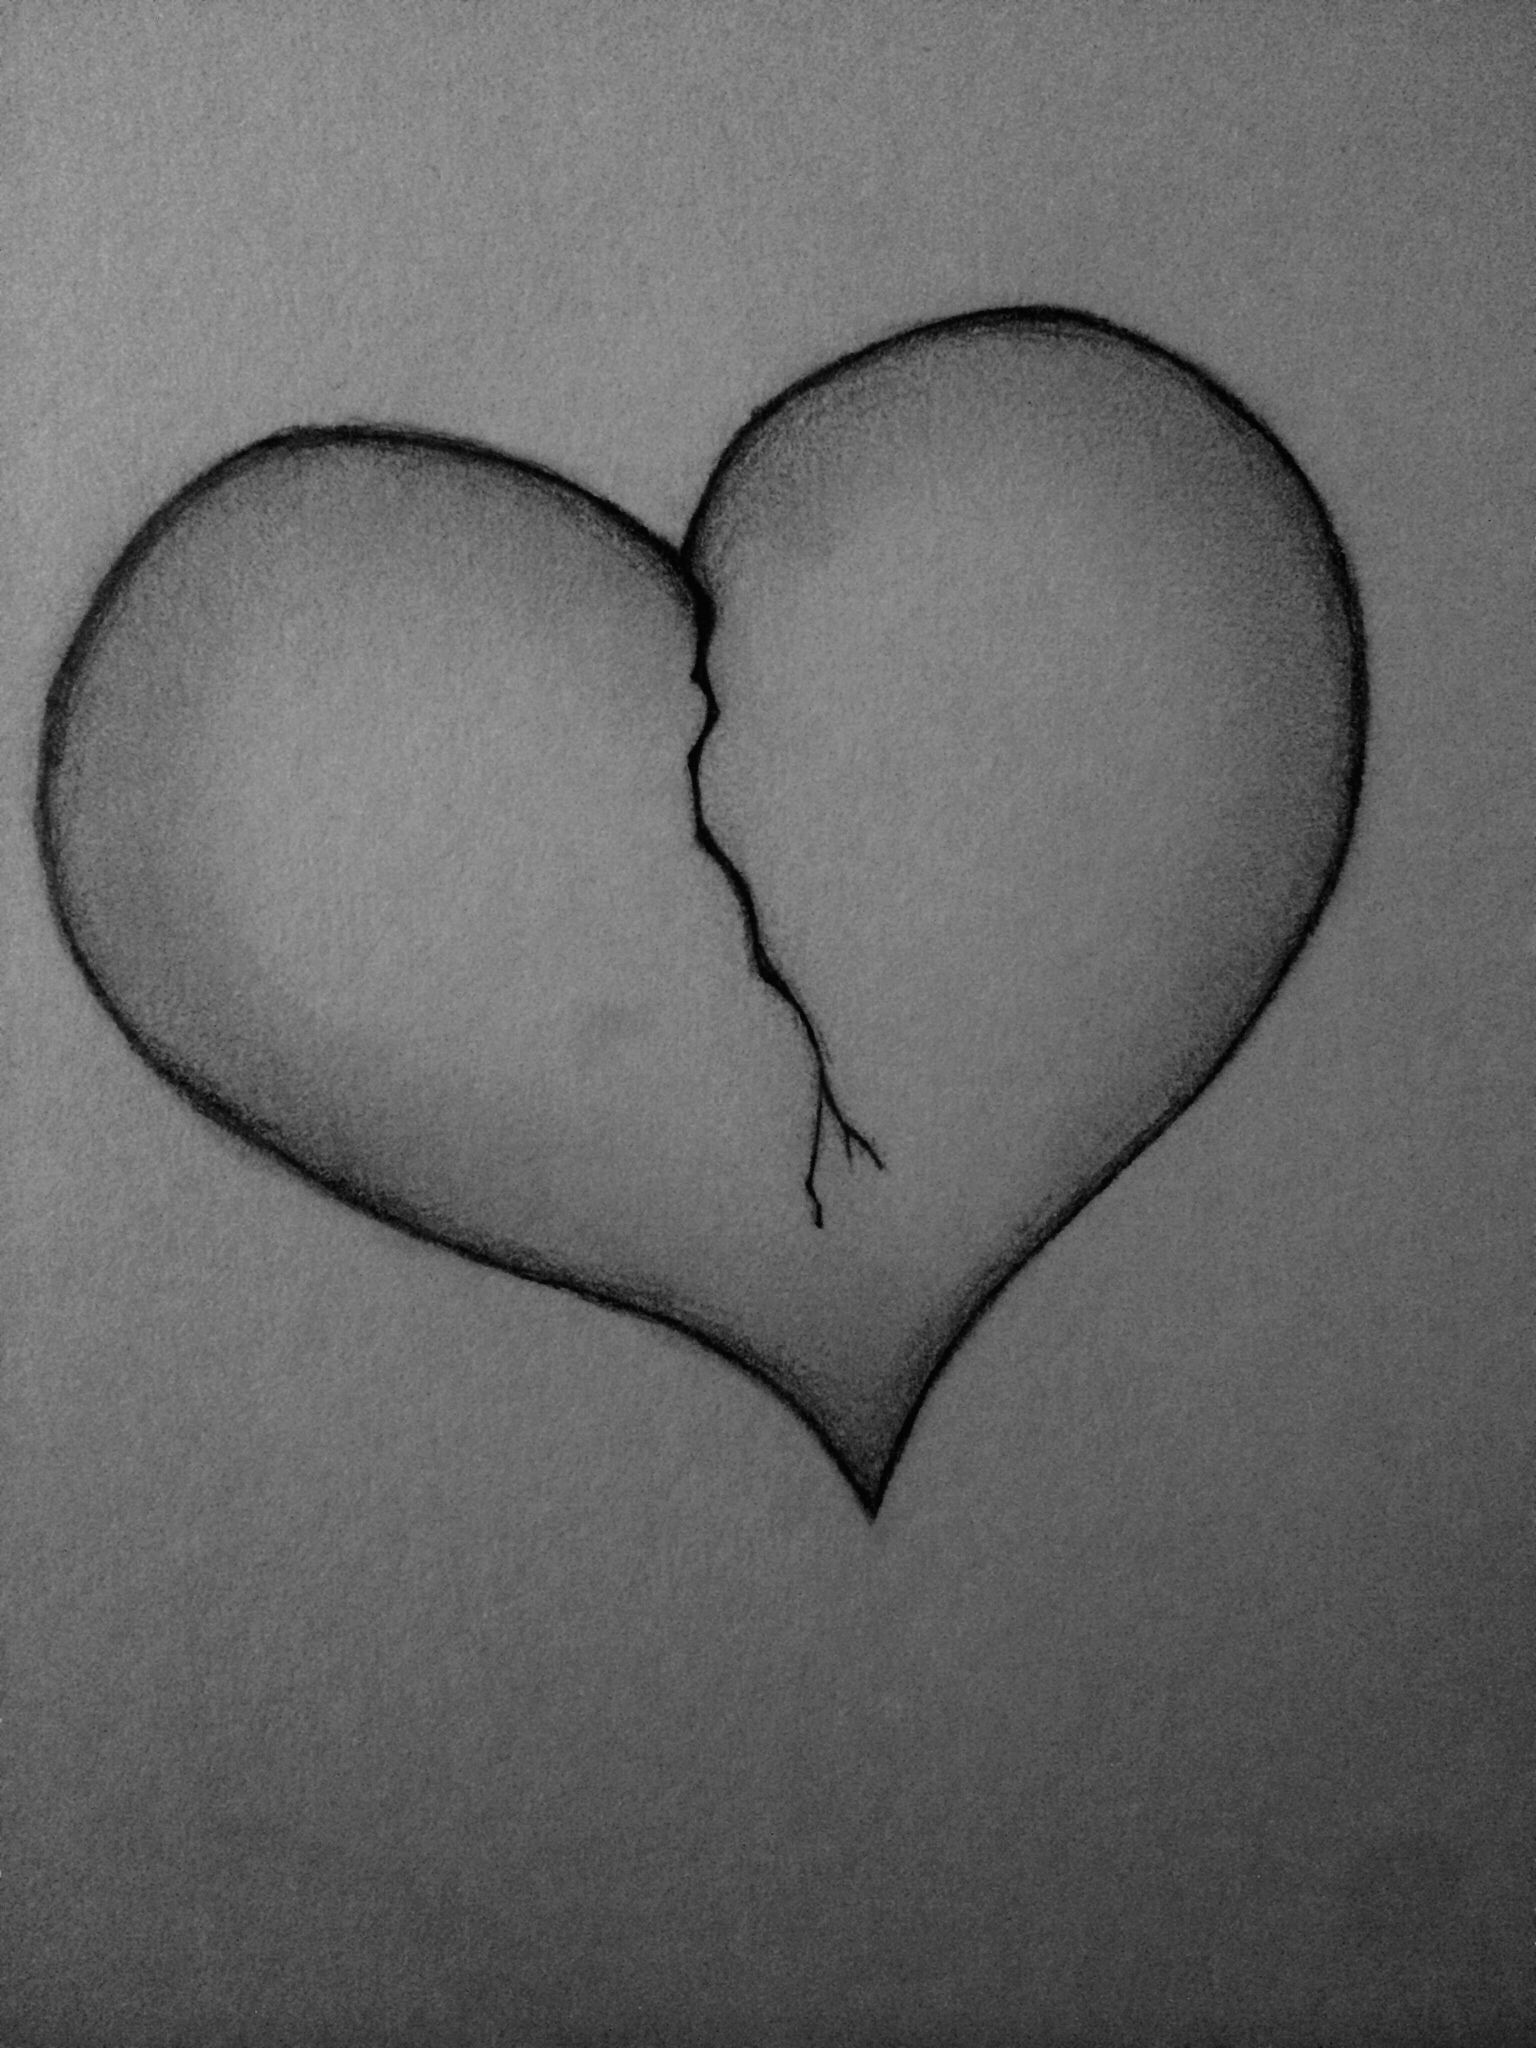 Broken Heart Sad Drawings Easy Step By Step A google search for the